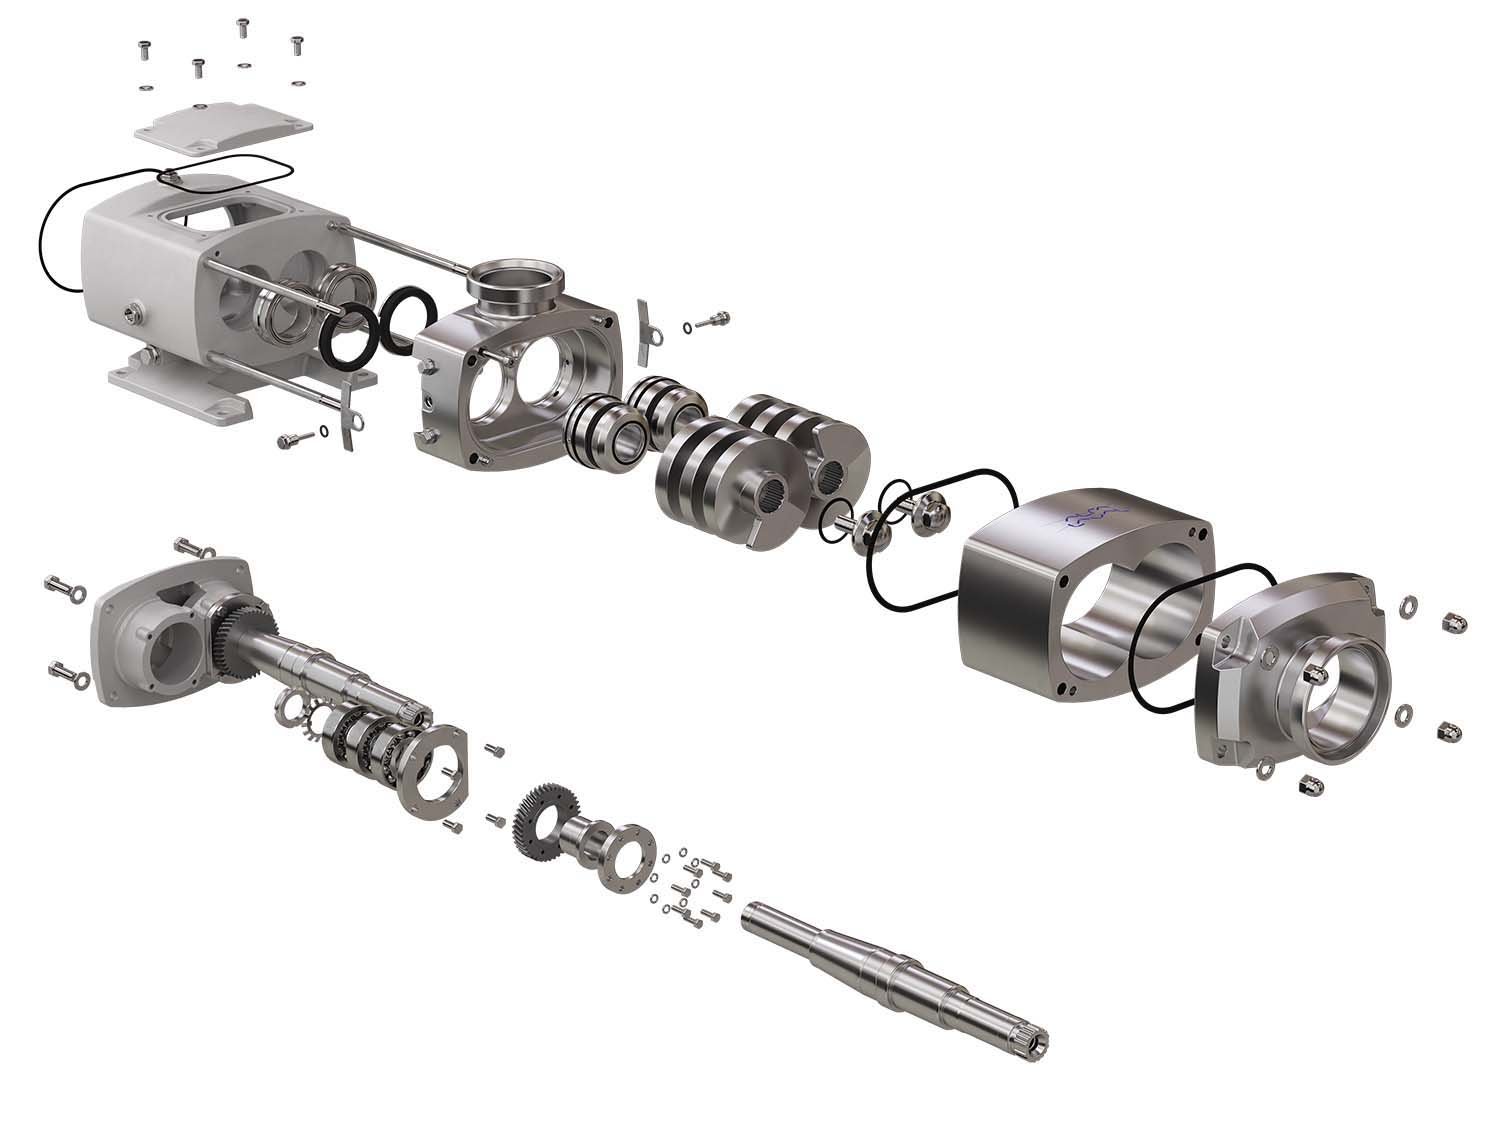 Exploded view of Alfa Laval twin screw pump